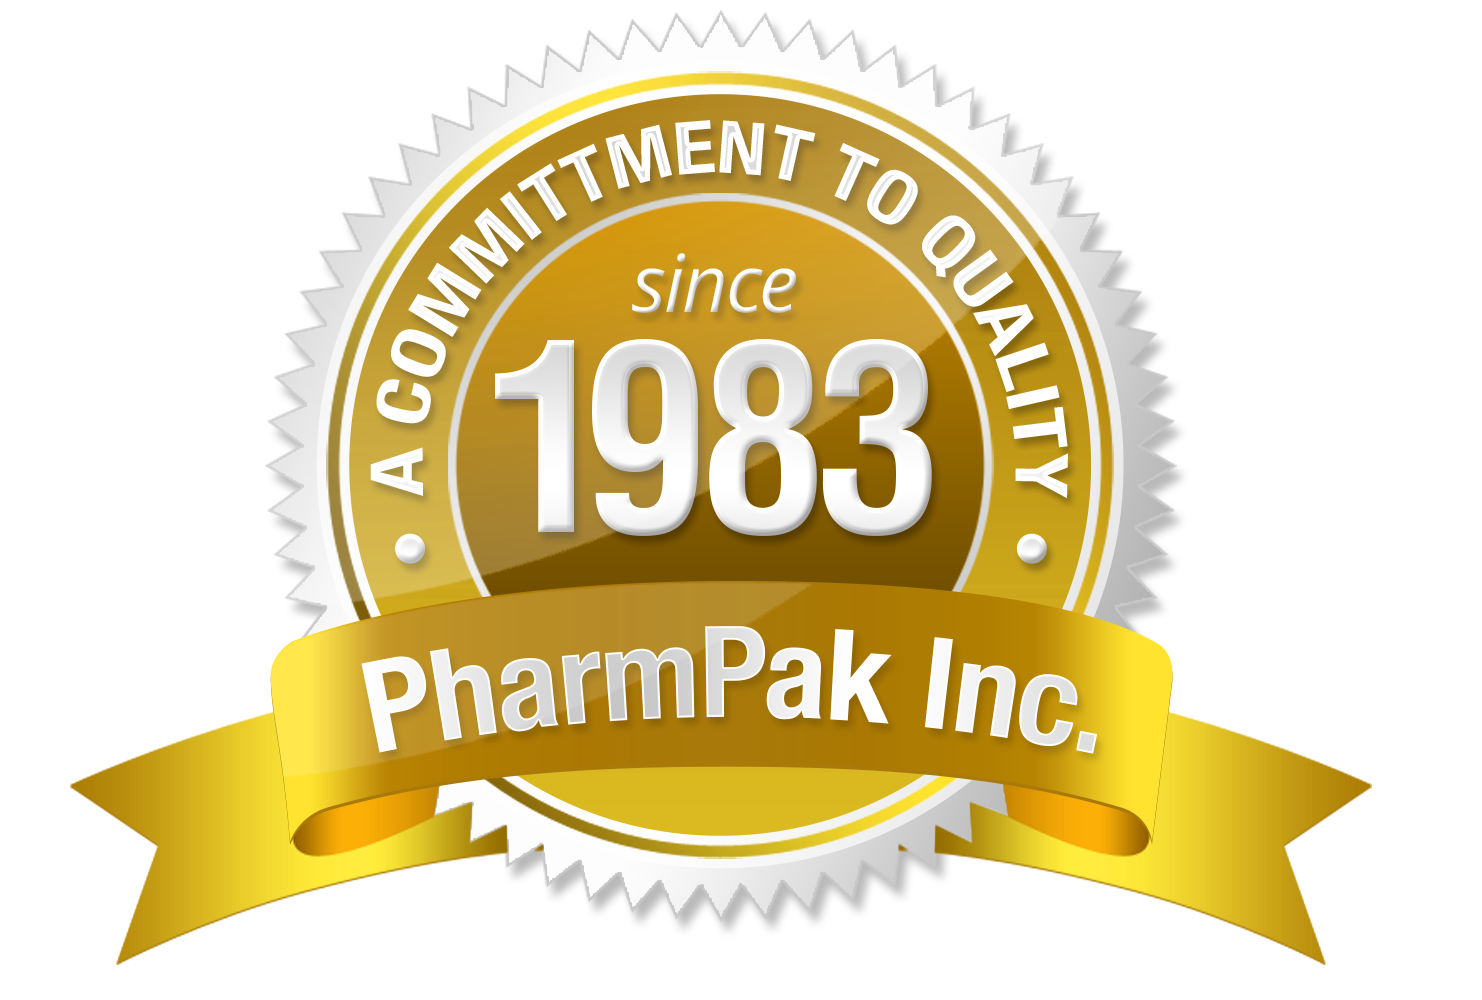 PharmPak: A commitment to Quality since 1983